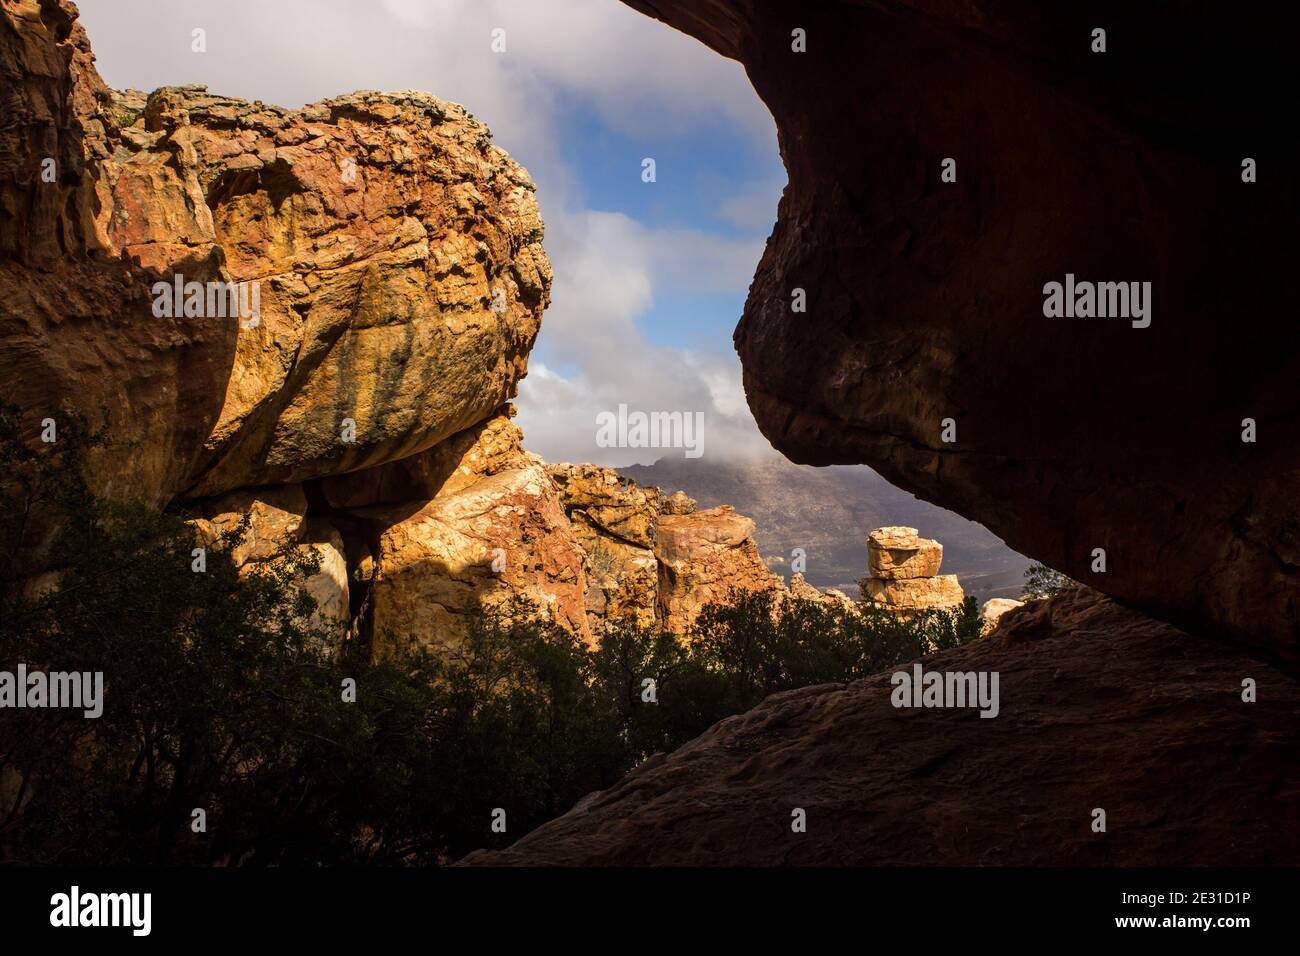 Light and shadows on the weathered sandstone rock formations at the Stadsaal Caves in the Cederberg Mountains of South Africa Stock Photo